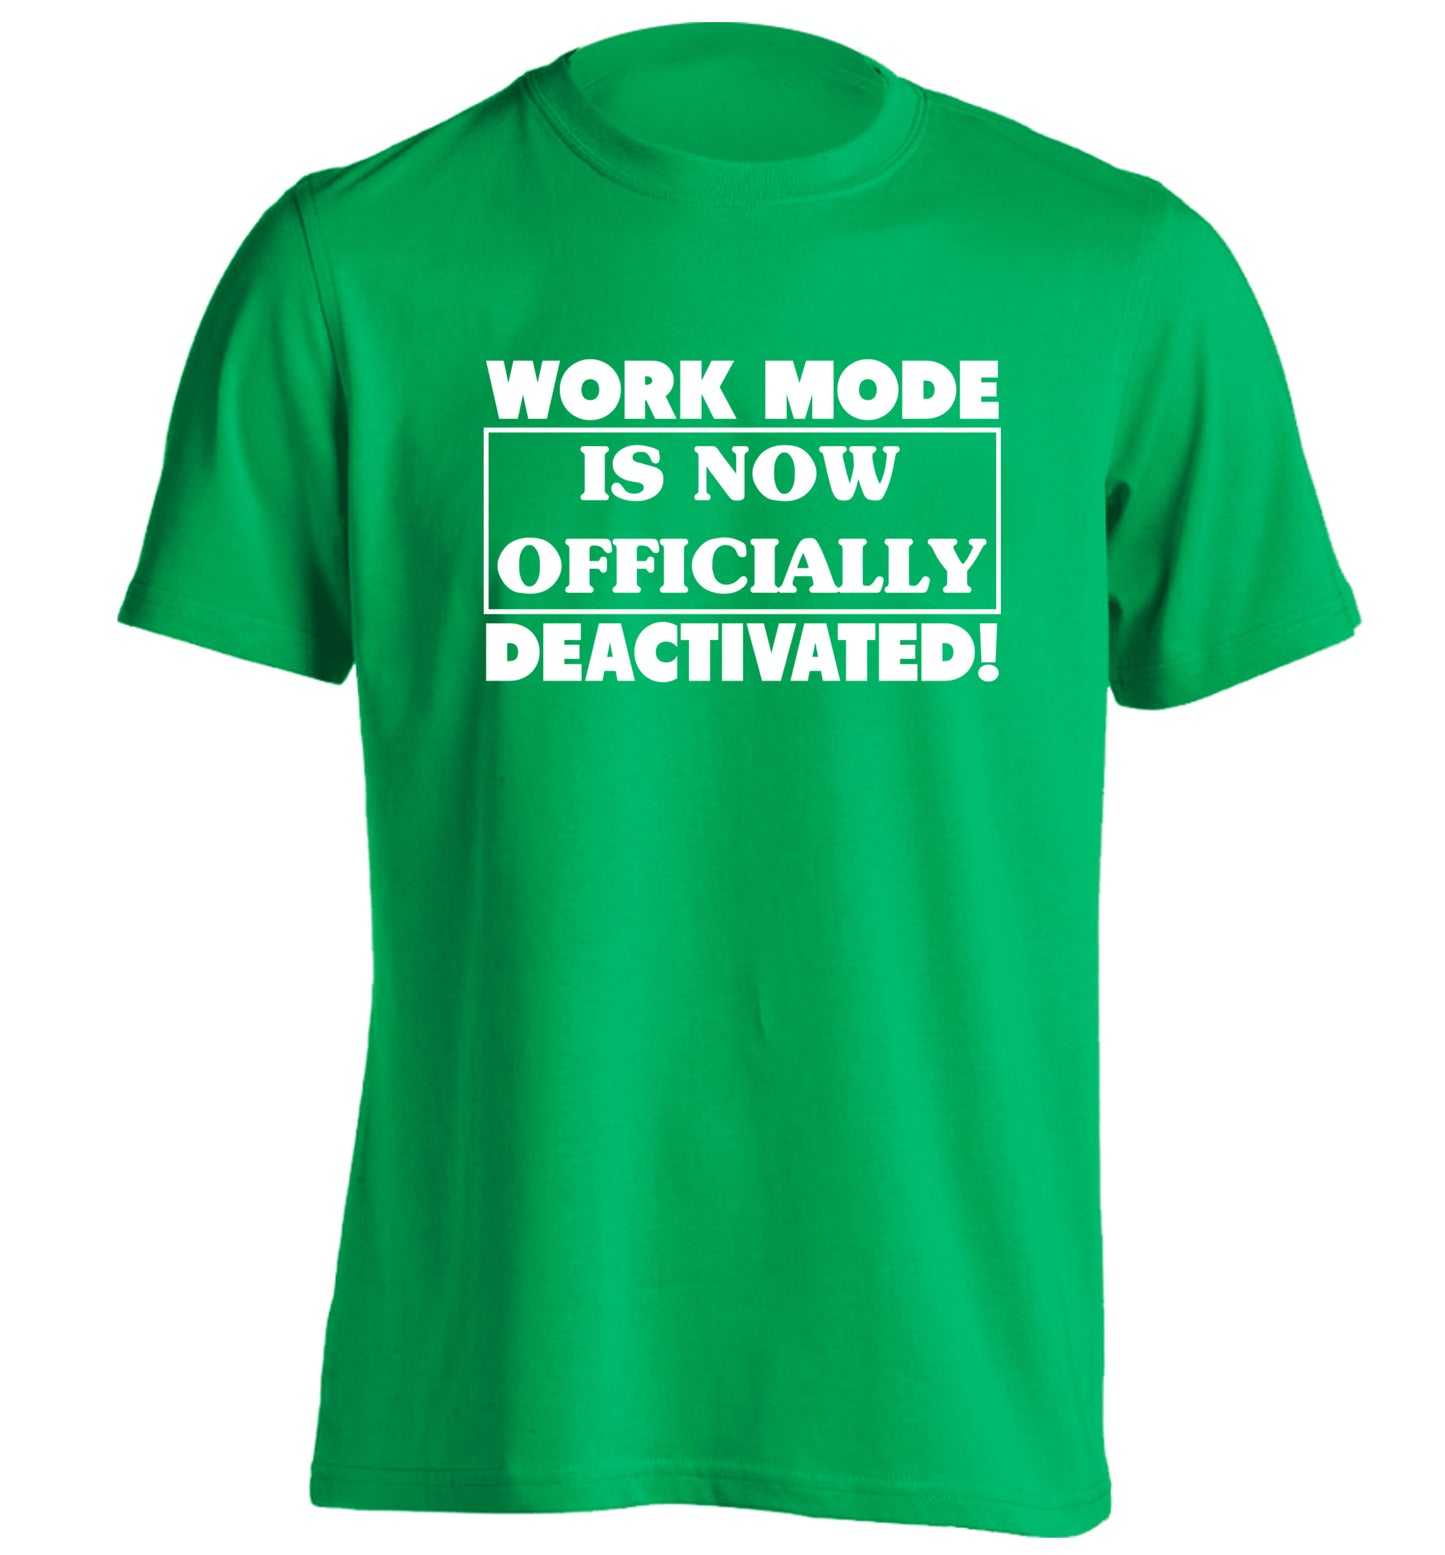 Work mode is now officially deactivated adults unisex green Tshirt 2XL